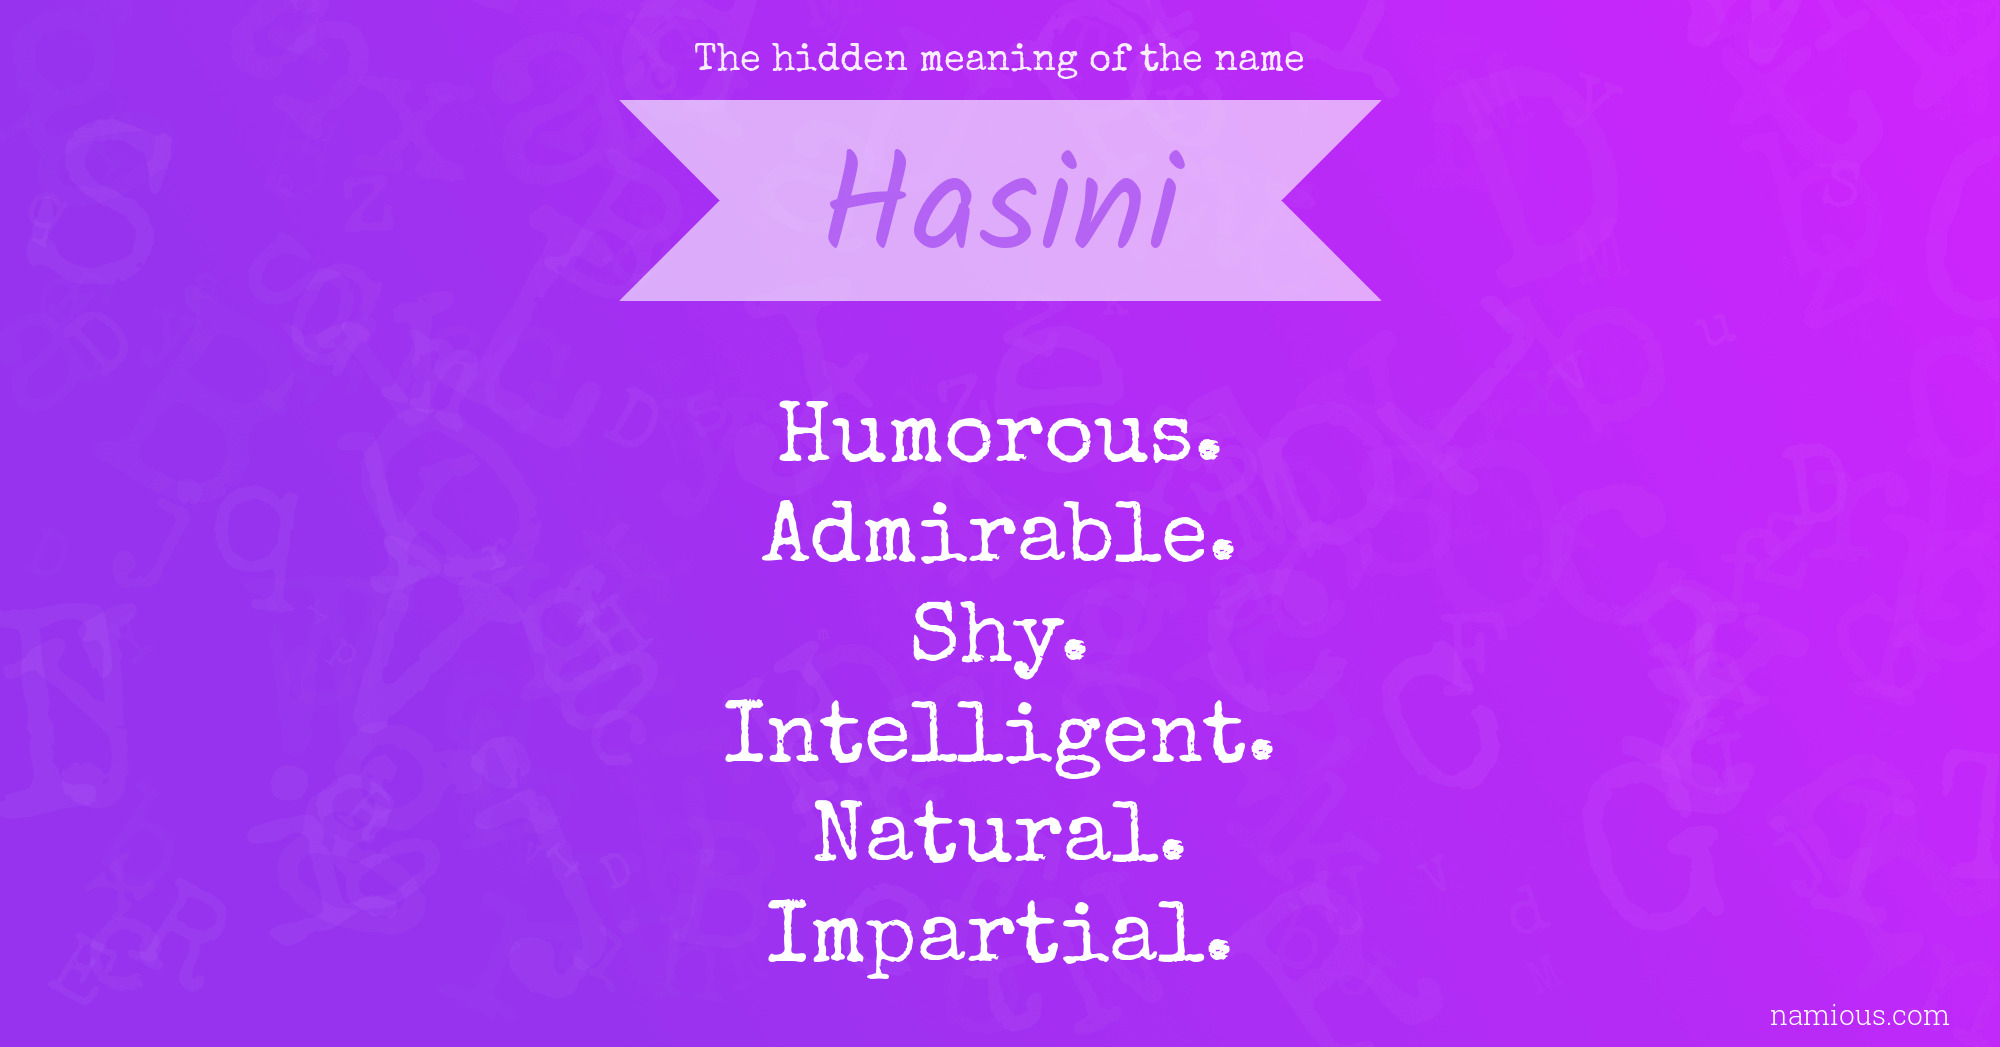 The hidden meaning of the name Hasini